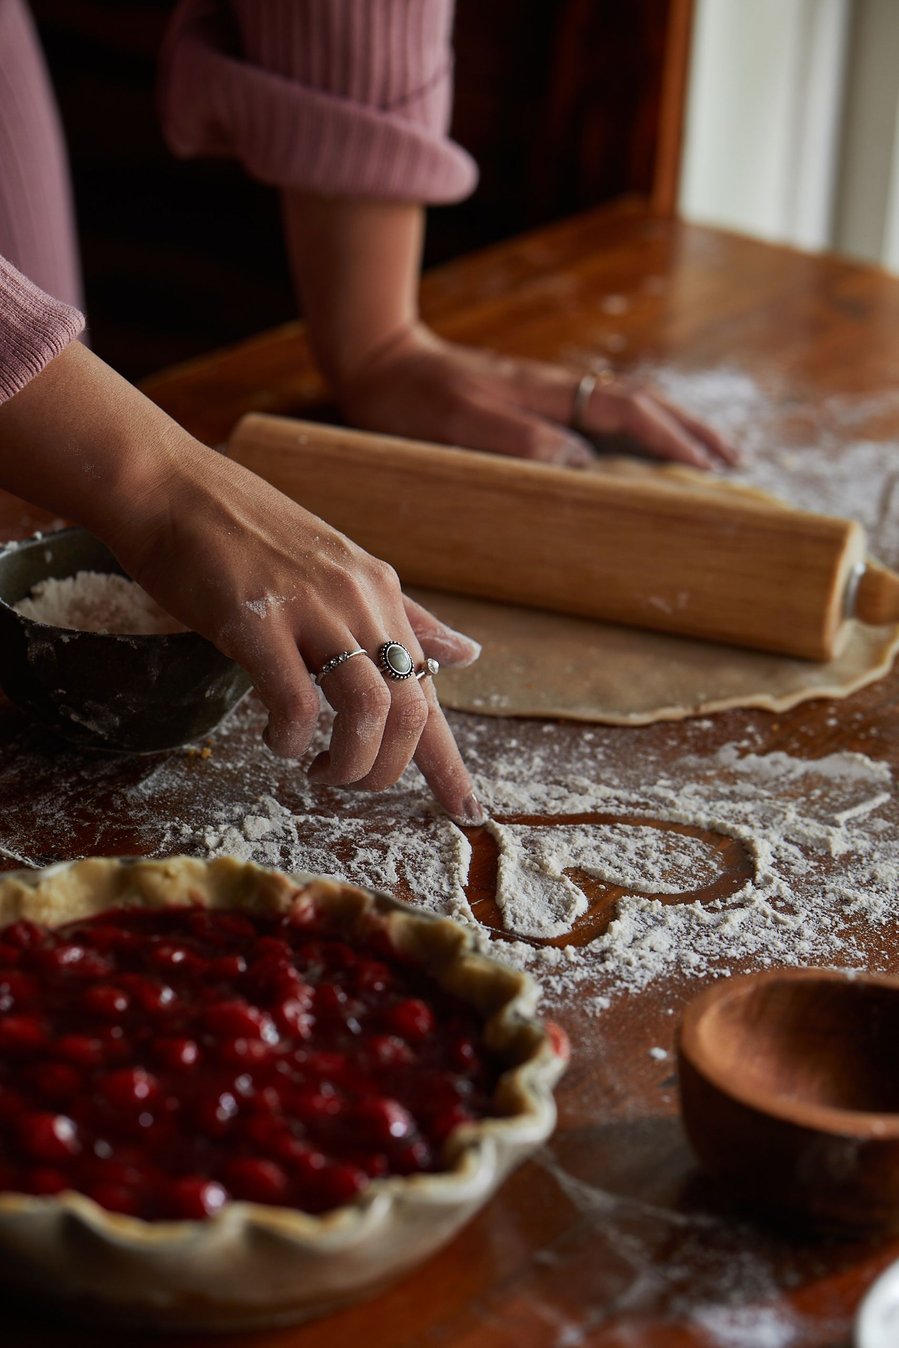 Woman in pink sweatsuit draws a heart in the flour spread on the table with a rolling pin and pie crust in the background and cherry pie in the foreground. Fashion and Lifestyle food photography for The Buckle